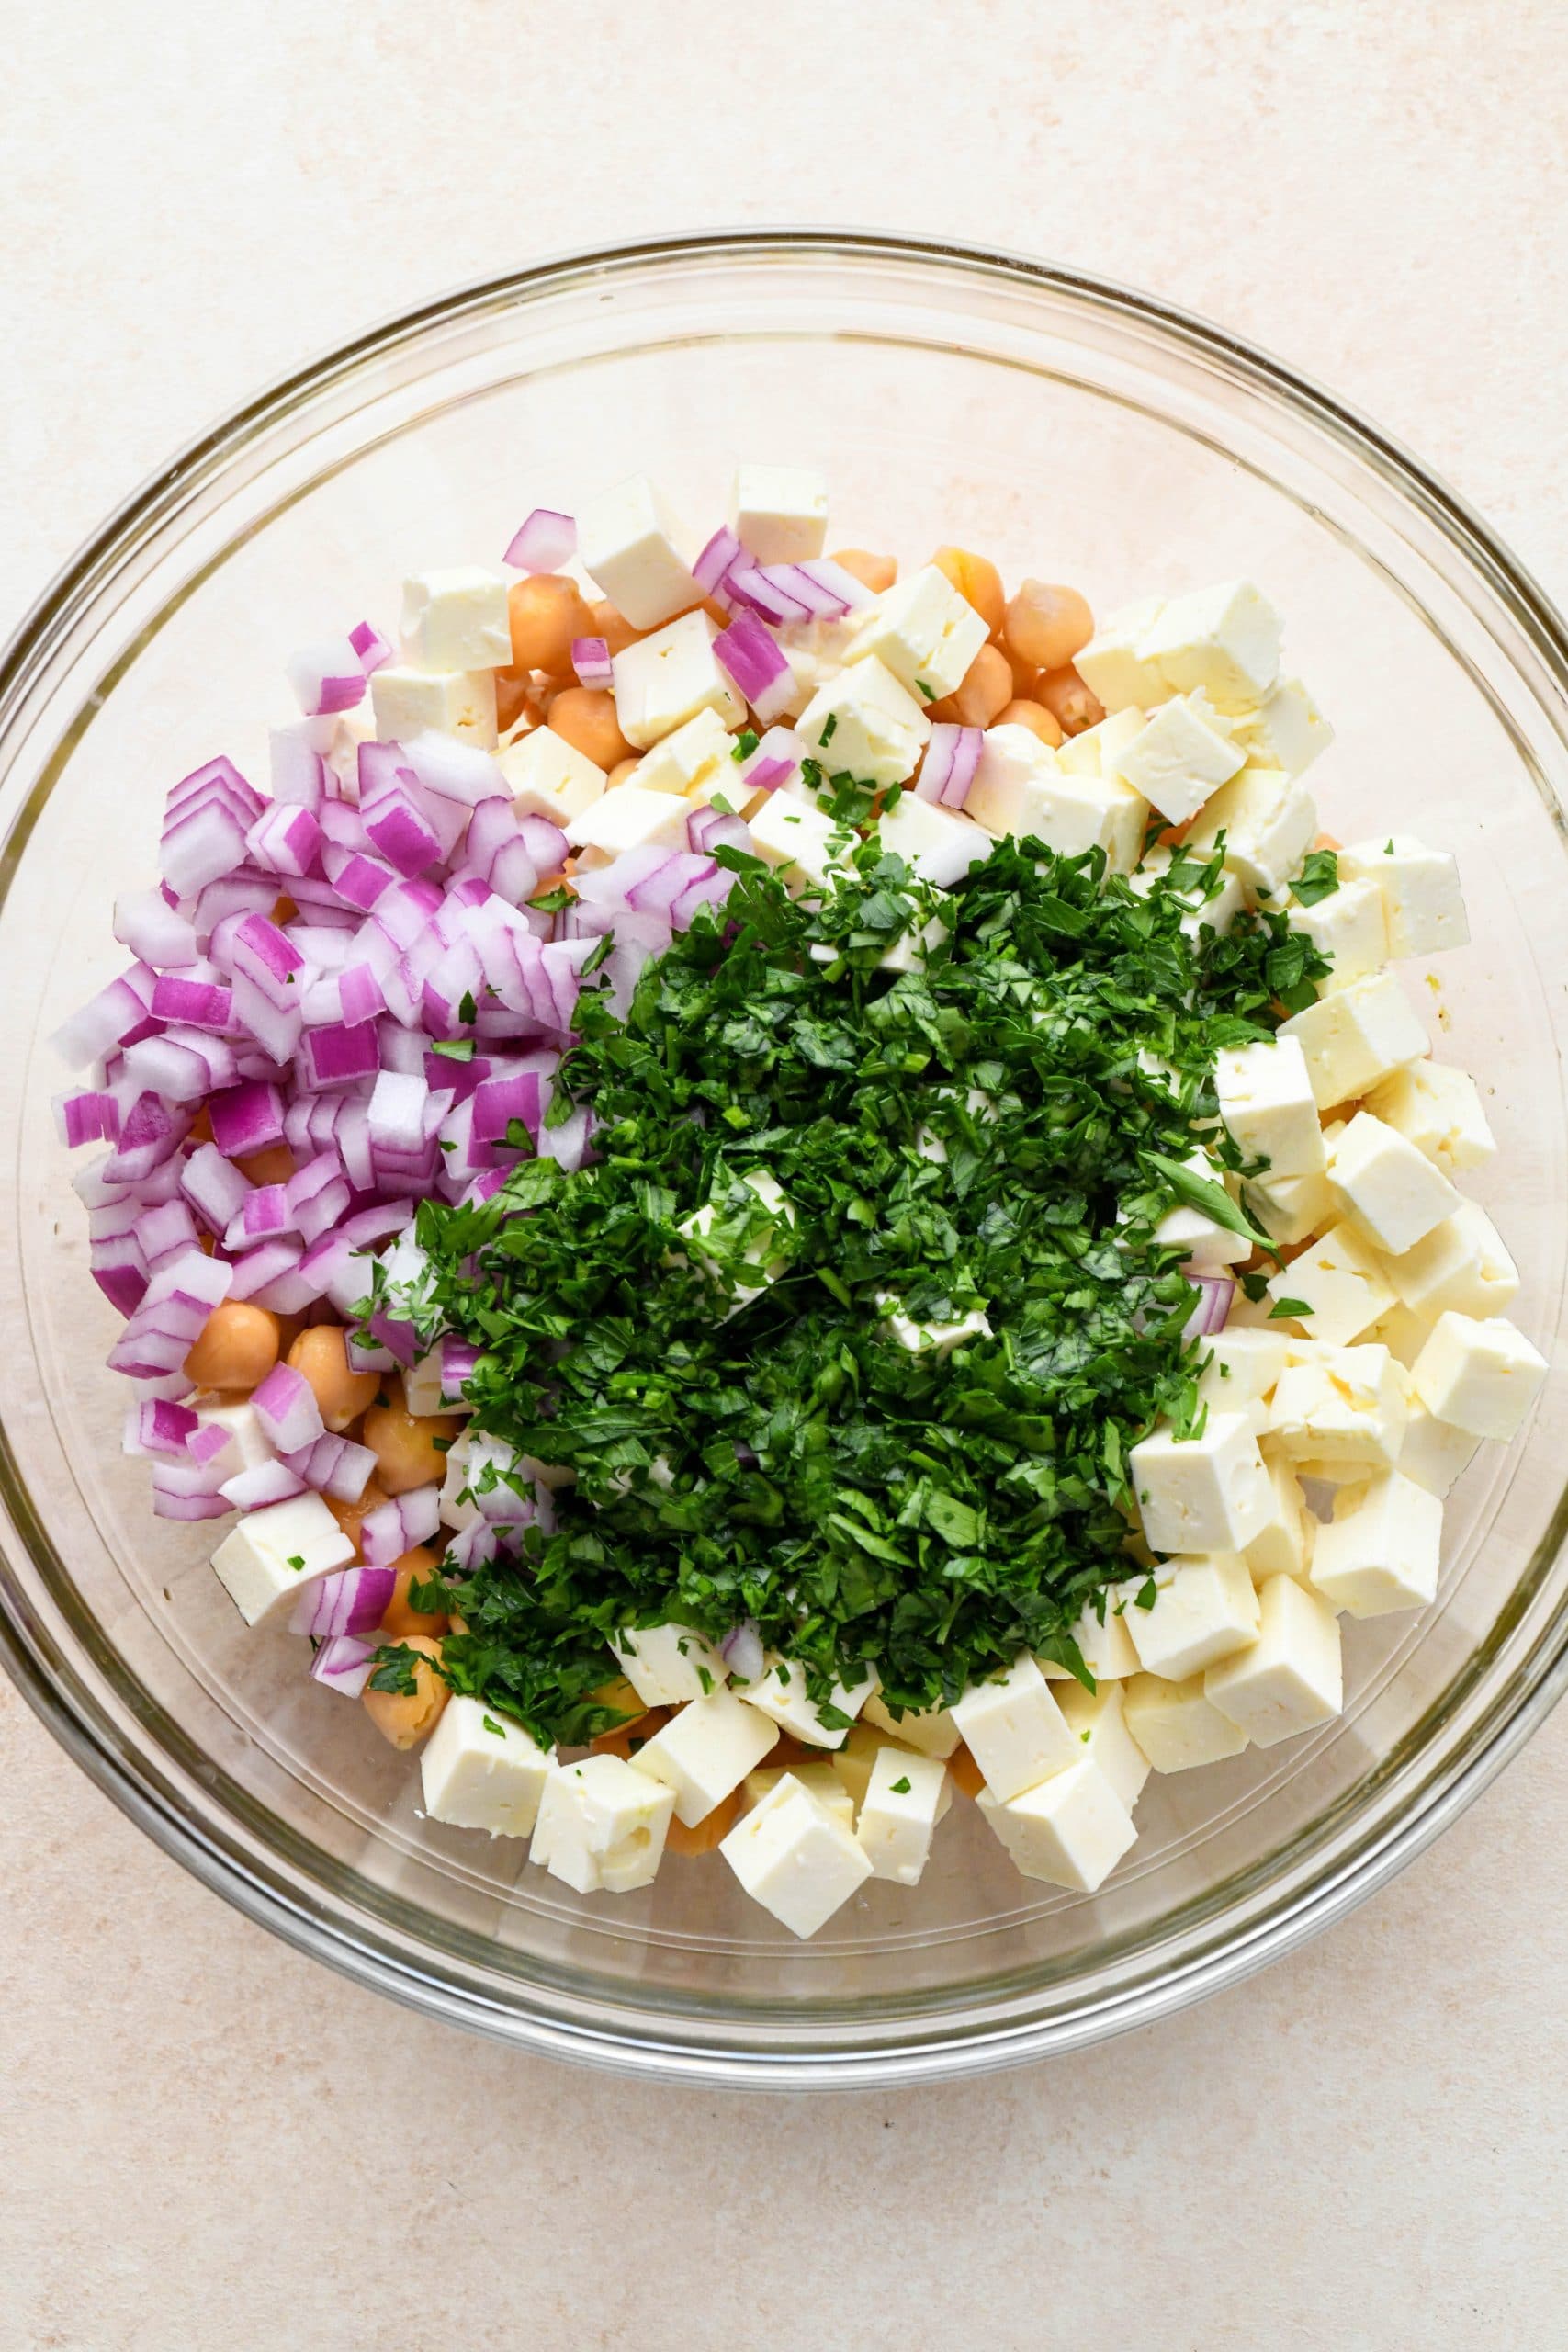 How to make lemony chickpea feta salad: Chickpeas, feta, herbs, and red onion added to the large glass bowl with dressing. 